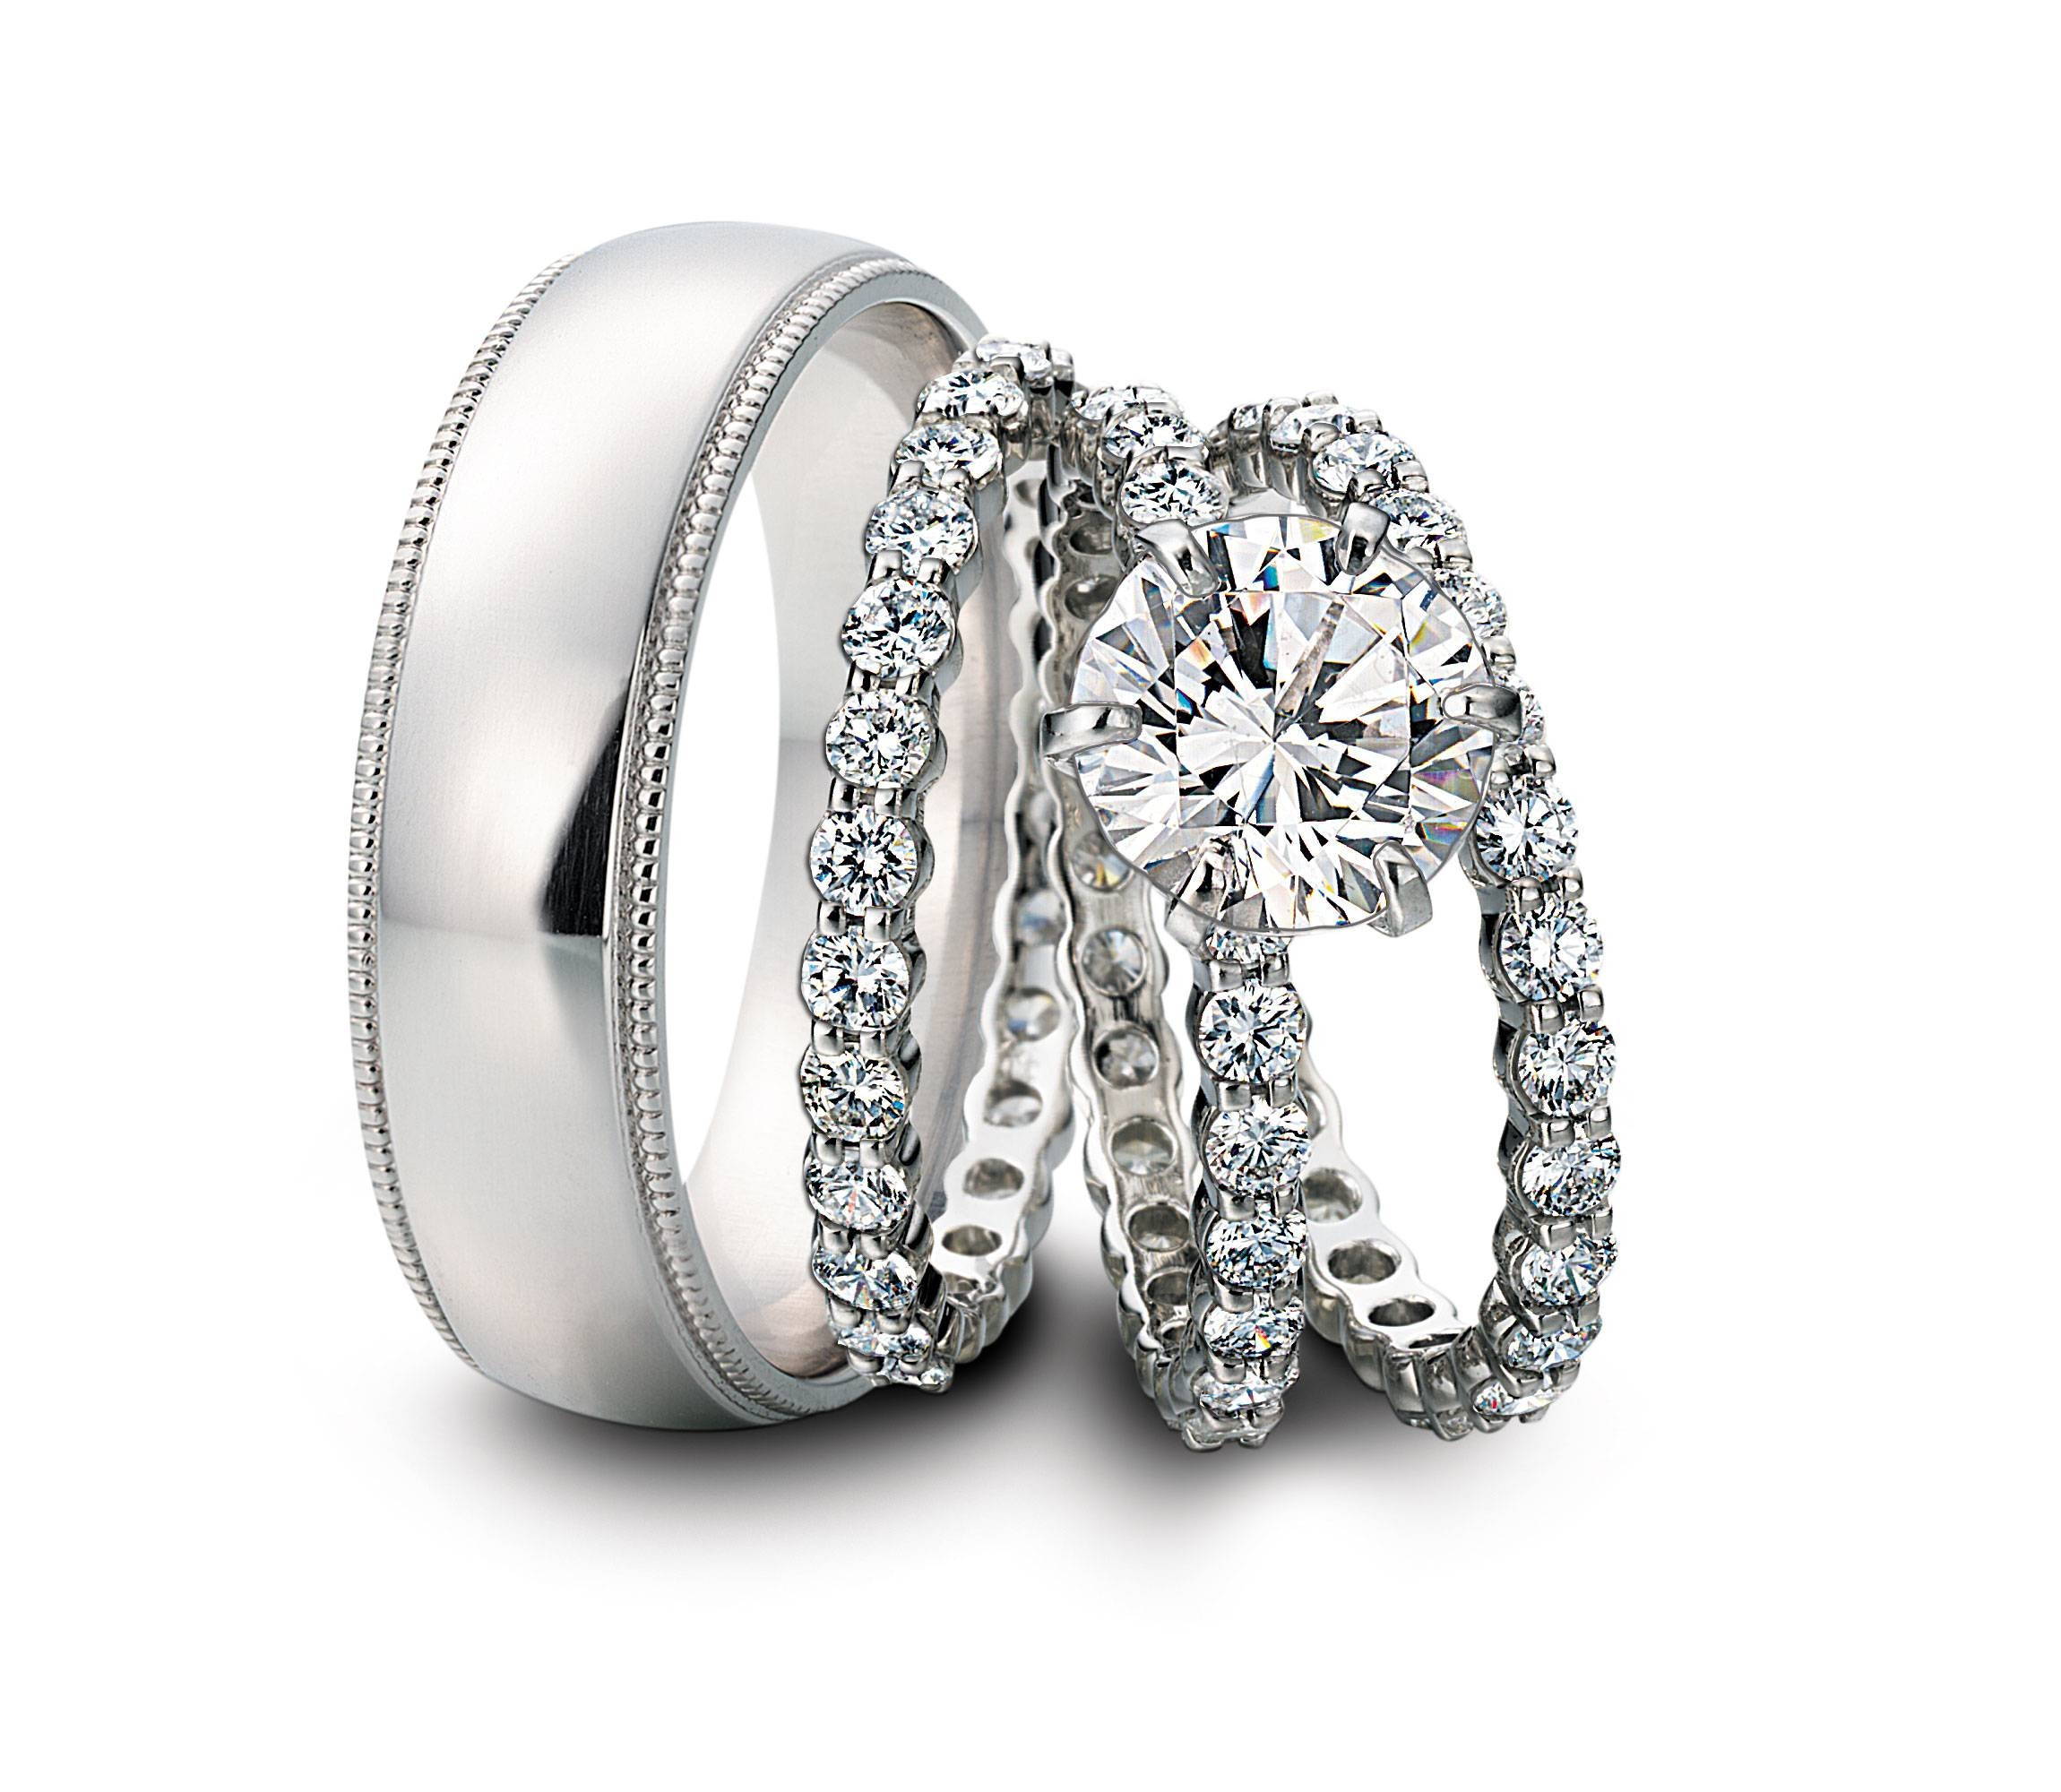 Cheap Wedding Bands For Him And Her
 15 Inspirations of Cheap Wedding Bands Sets His And Hers